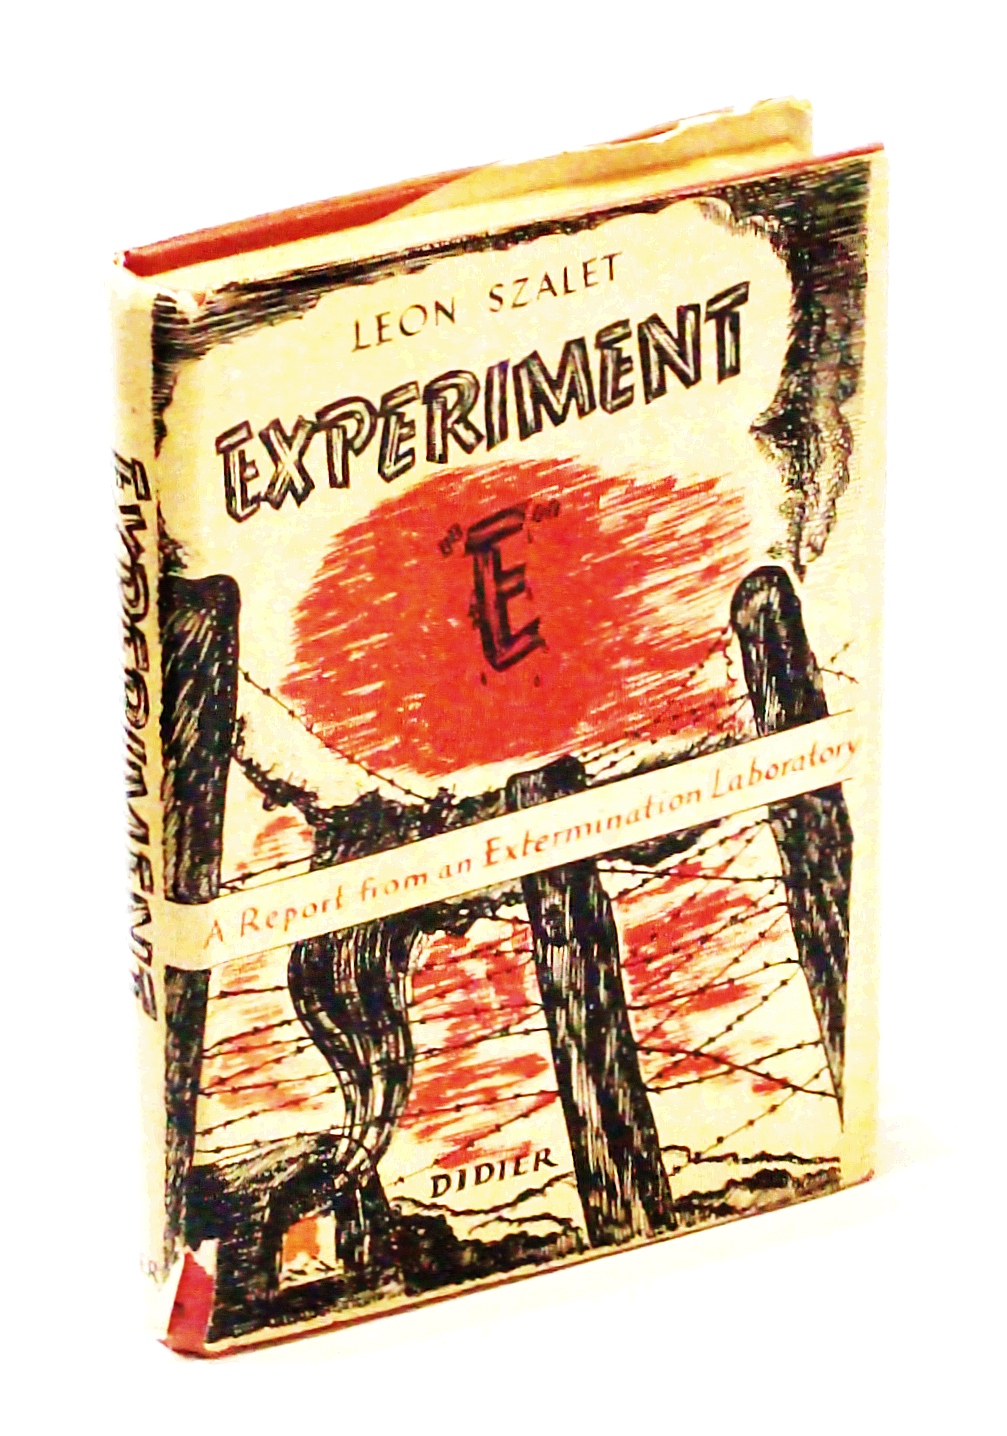 Image for Experiment "E" - a Report from an Extermination Laboratory